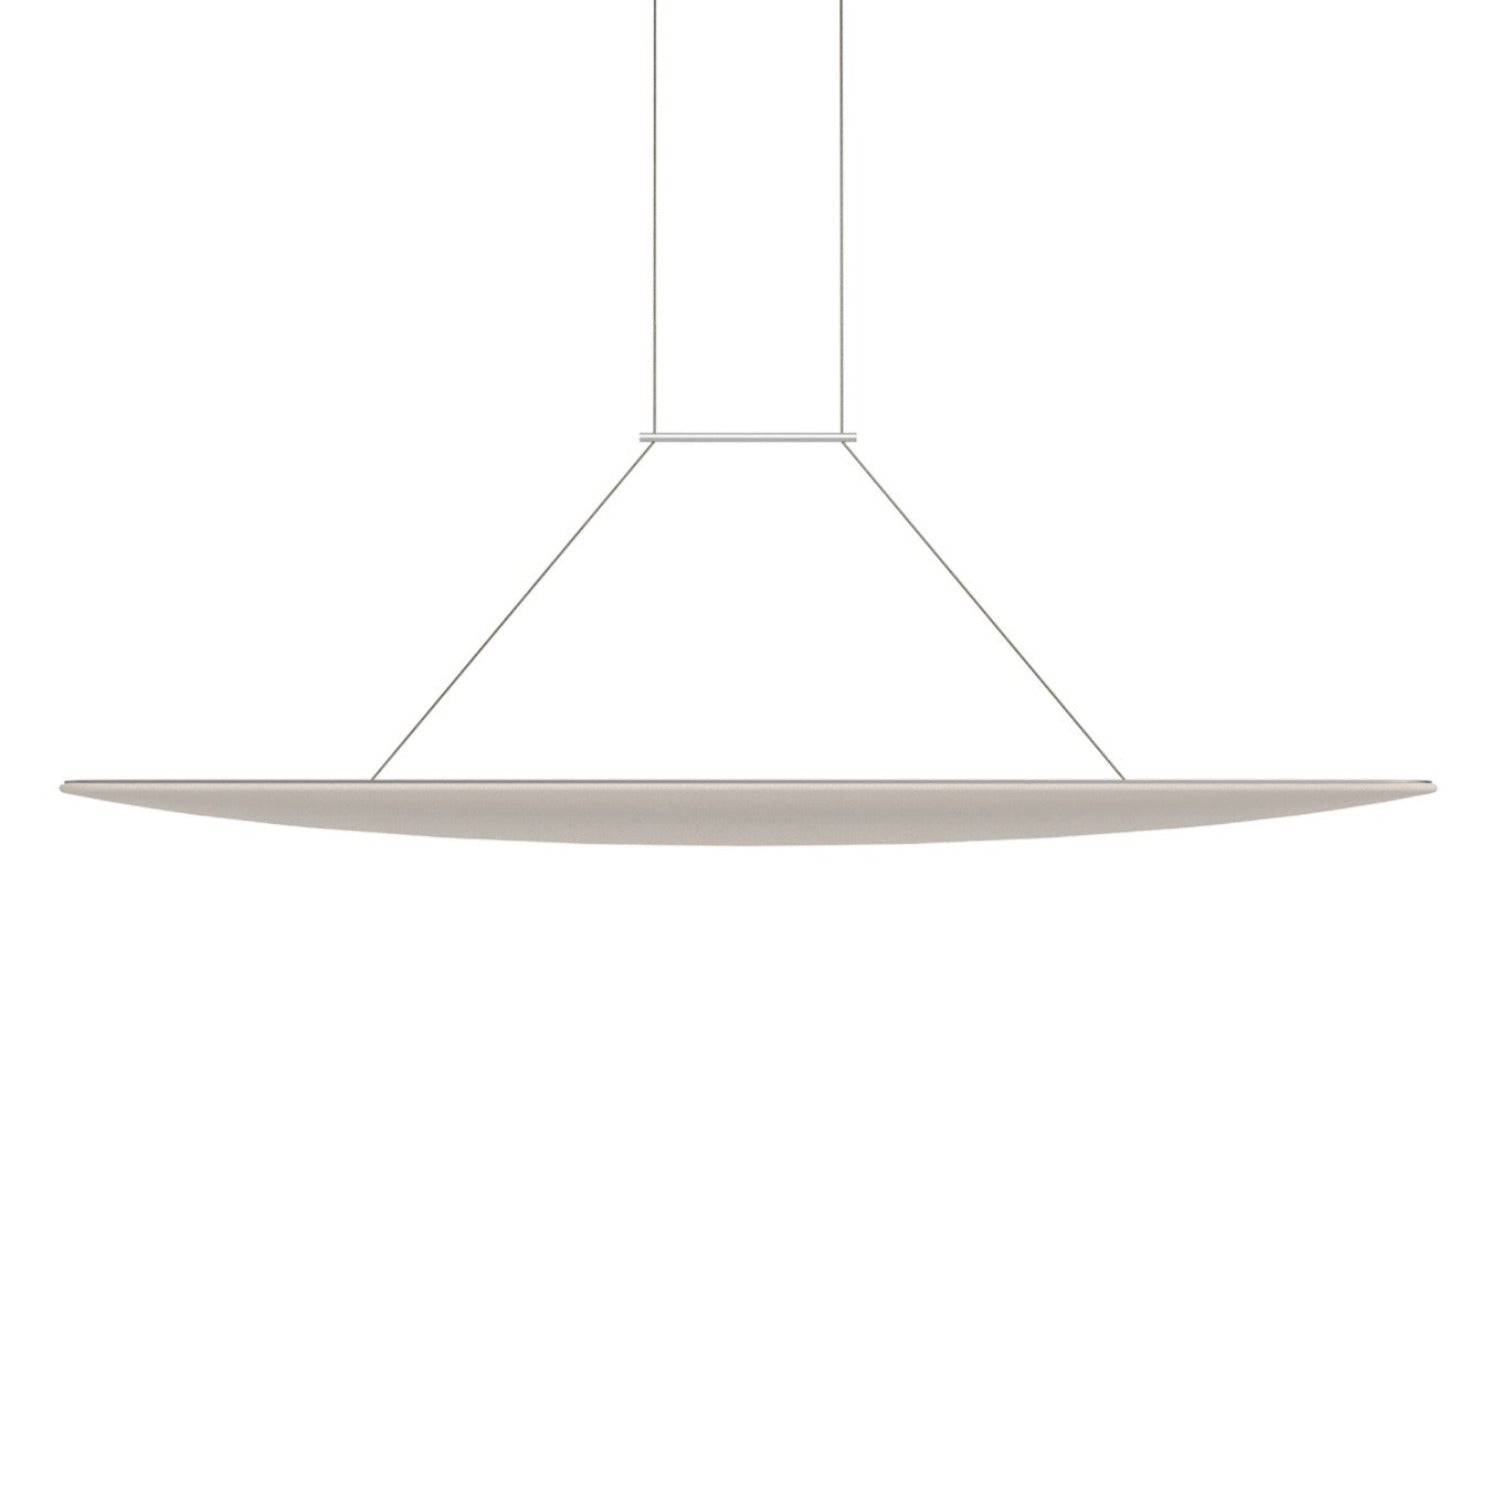 VOYAGE - Elegant and sleek chandelier in fabric and aluminum